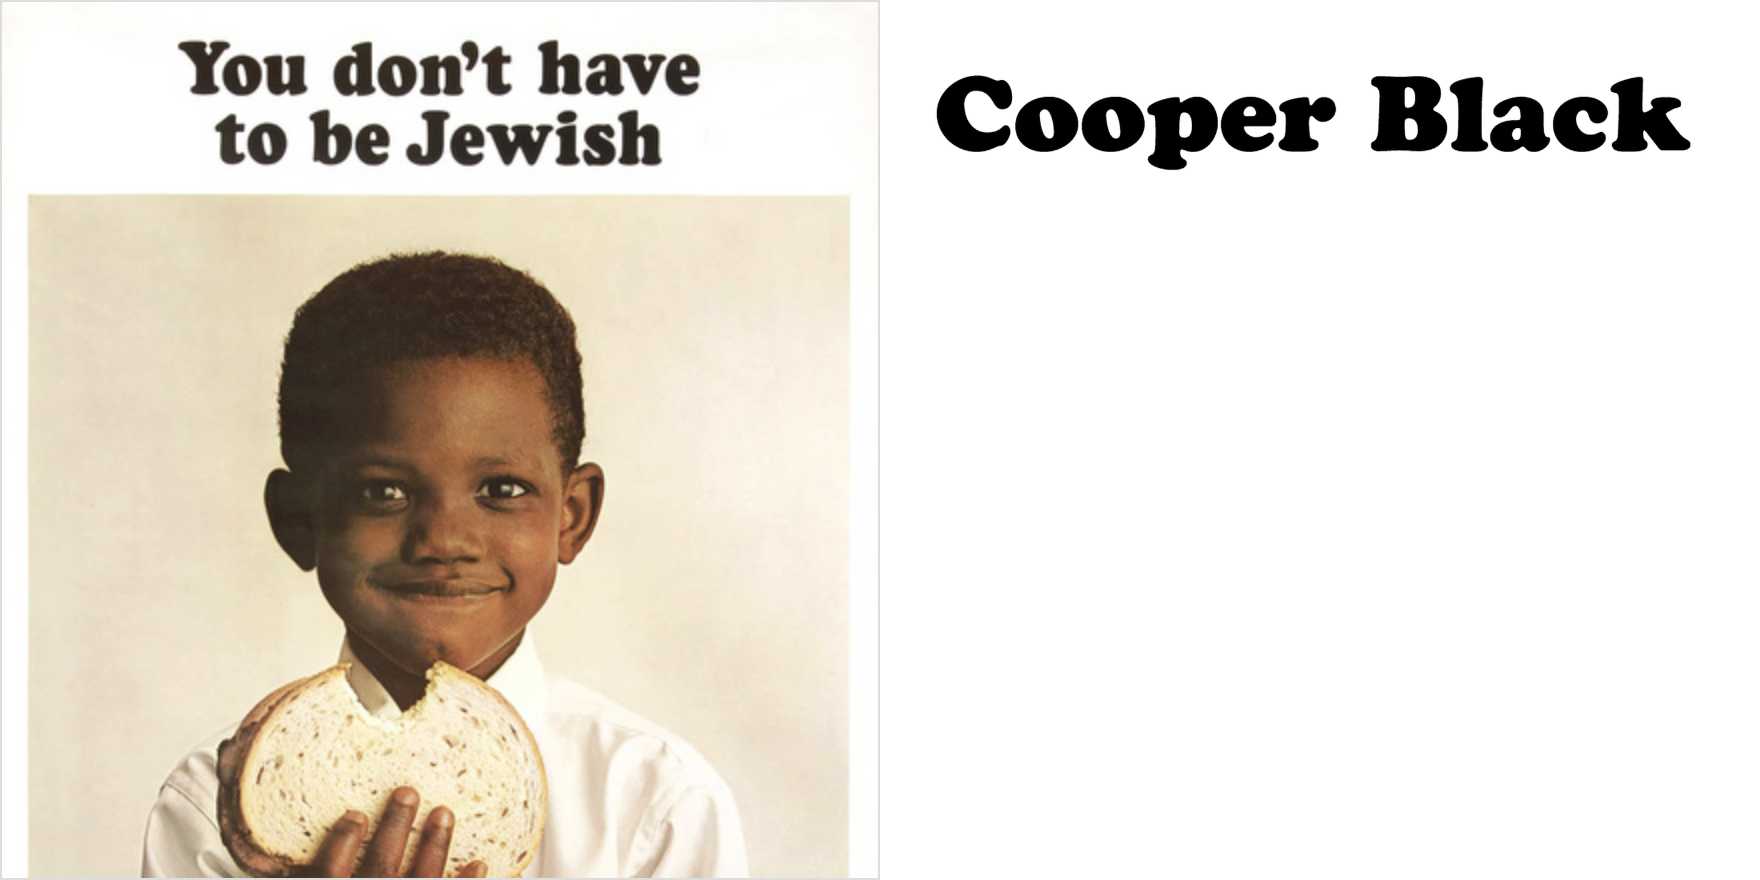 Levy’s ad campaign: “You don’t have to be Jewish” (1961–70s) - Fonts In Use